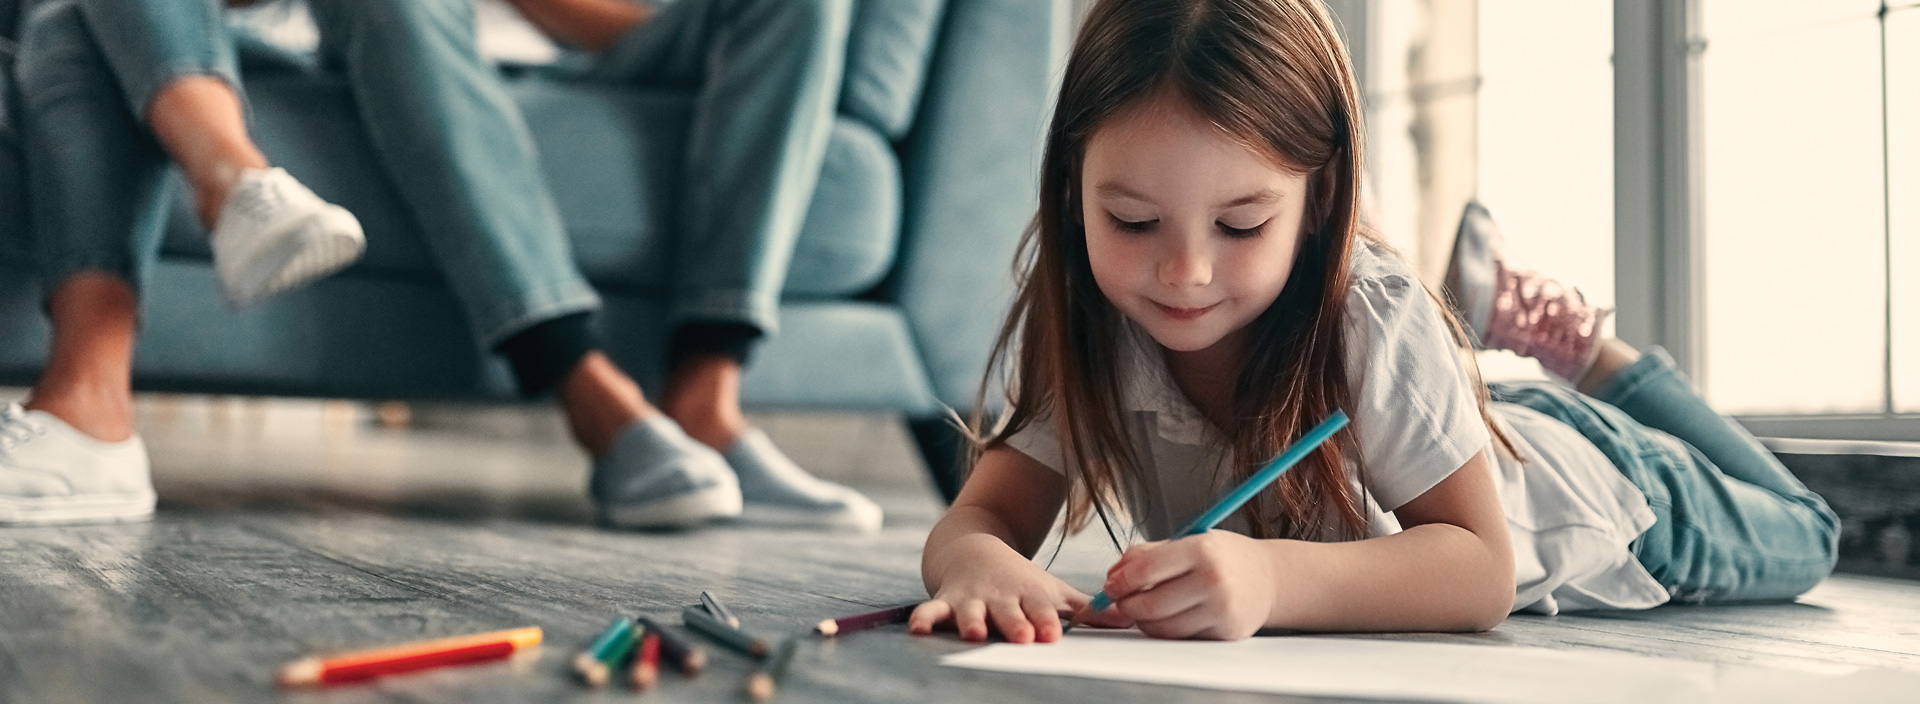 A young child colouring with pencil crayons.